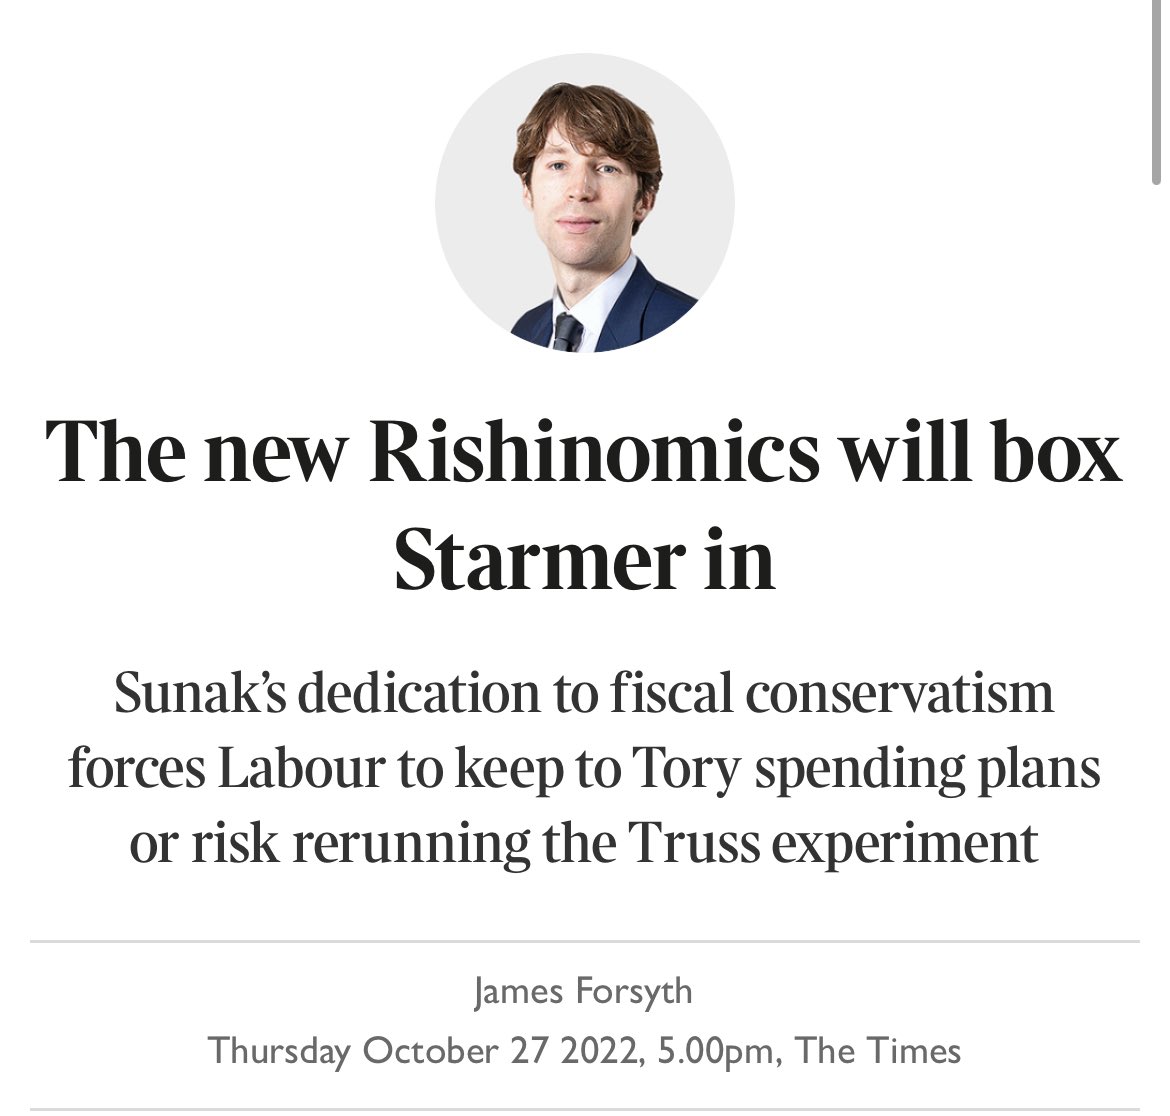 I try to be fair, but I do just think it is professionally dubious to write a glowing column about the PM in the Comment pages of the Times without mentioning he’s your best friend and was best man at your wedding.